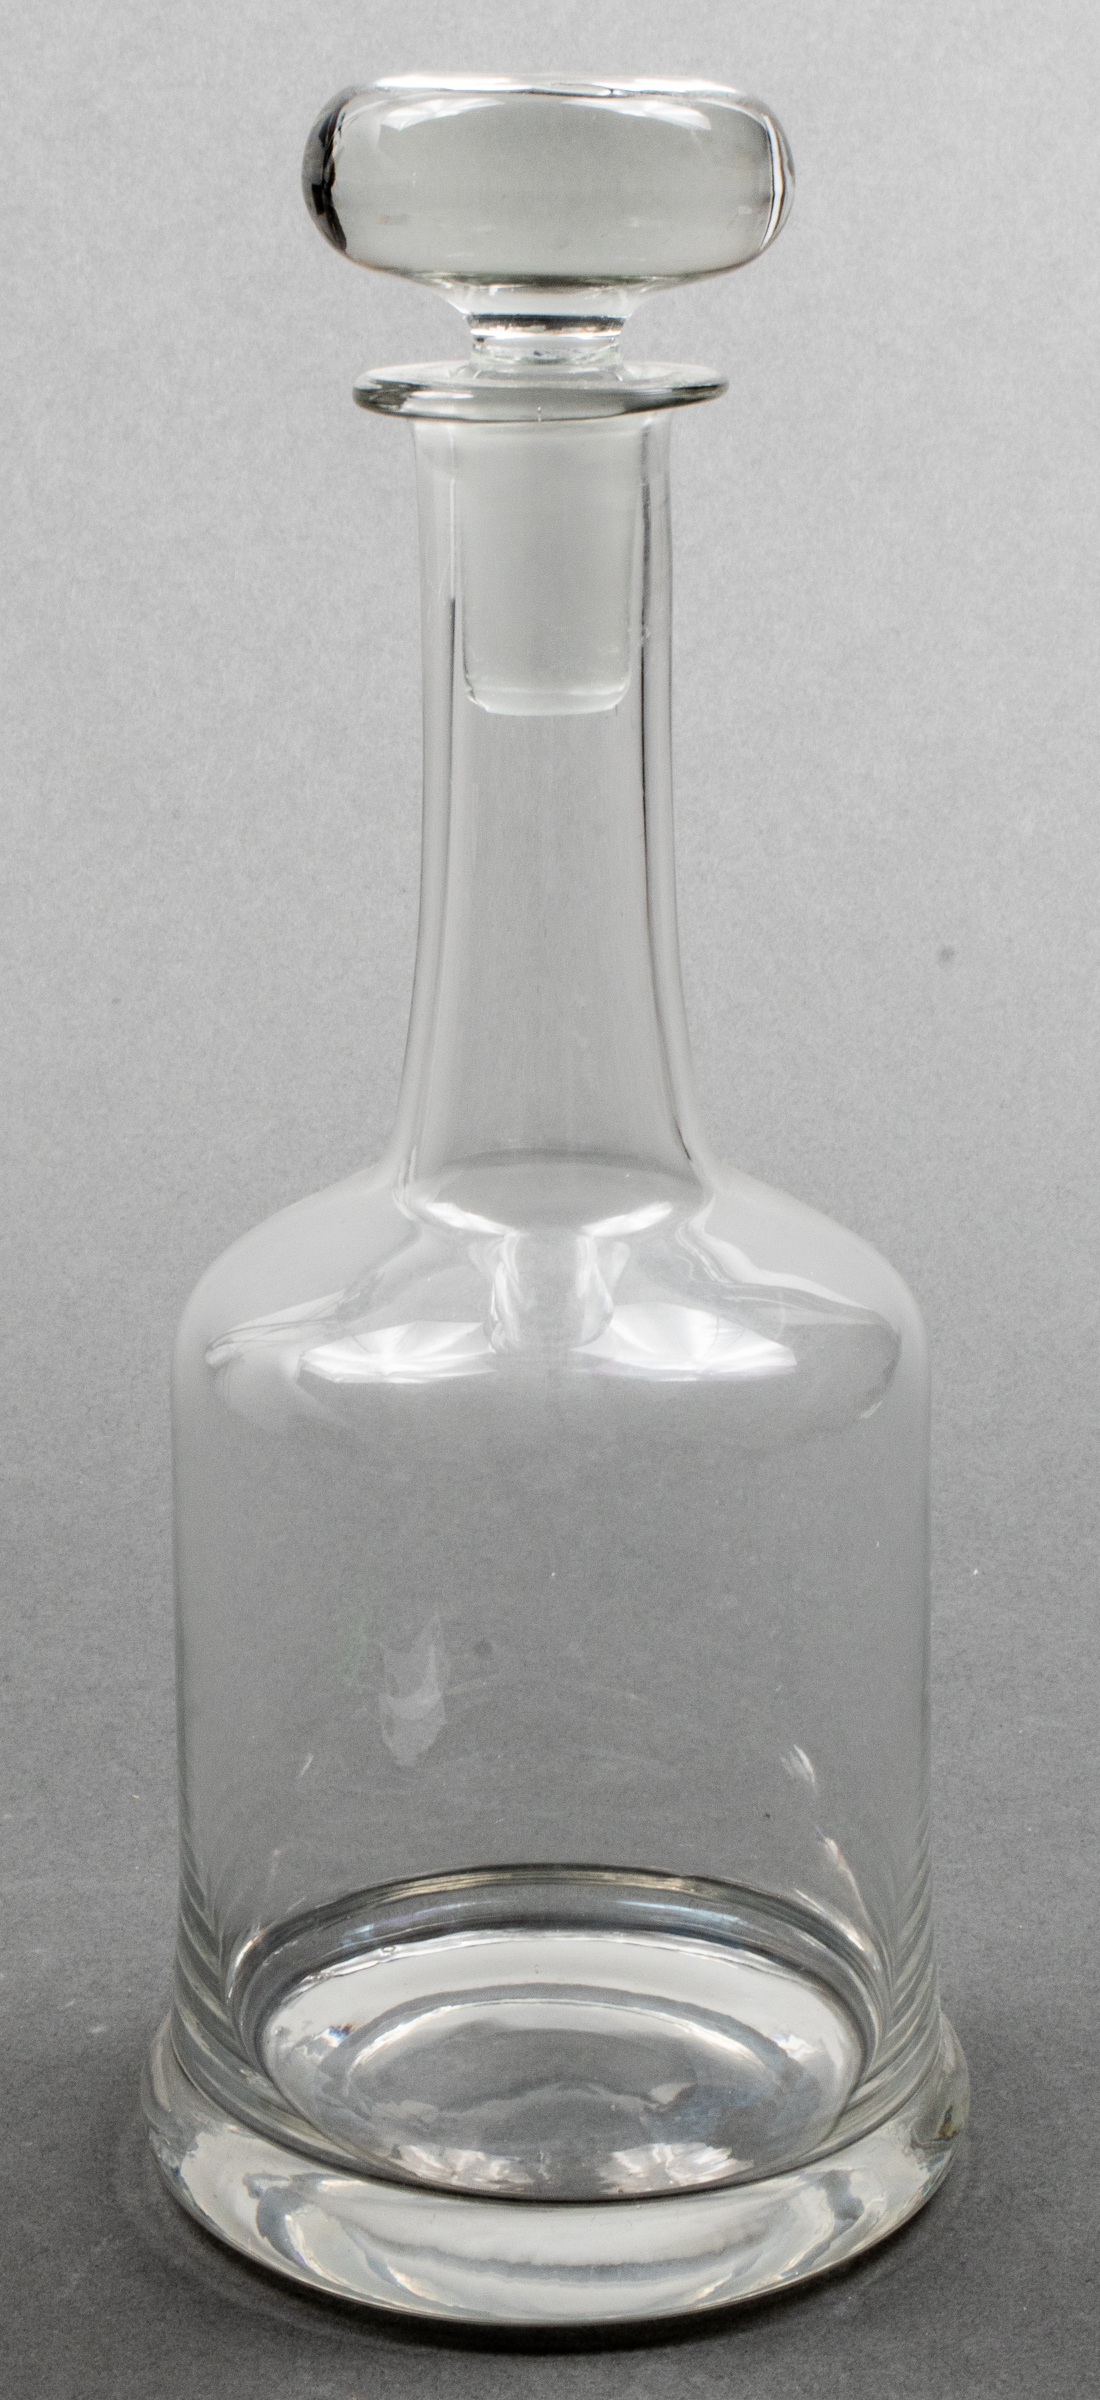 GLASS DECANTER WITH STOPPER TOP  3c36dc